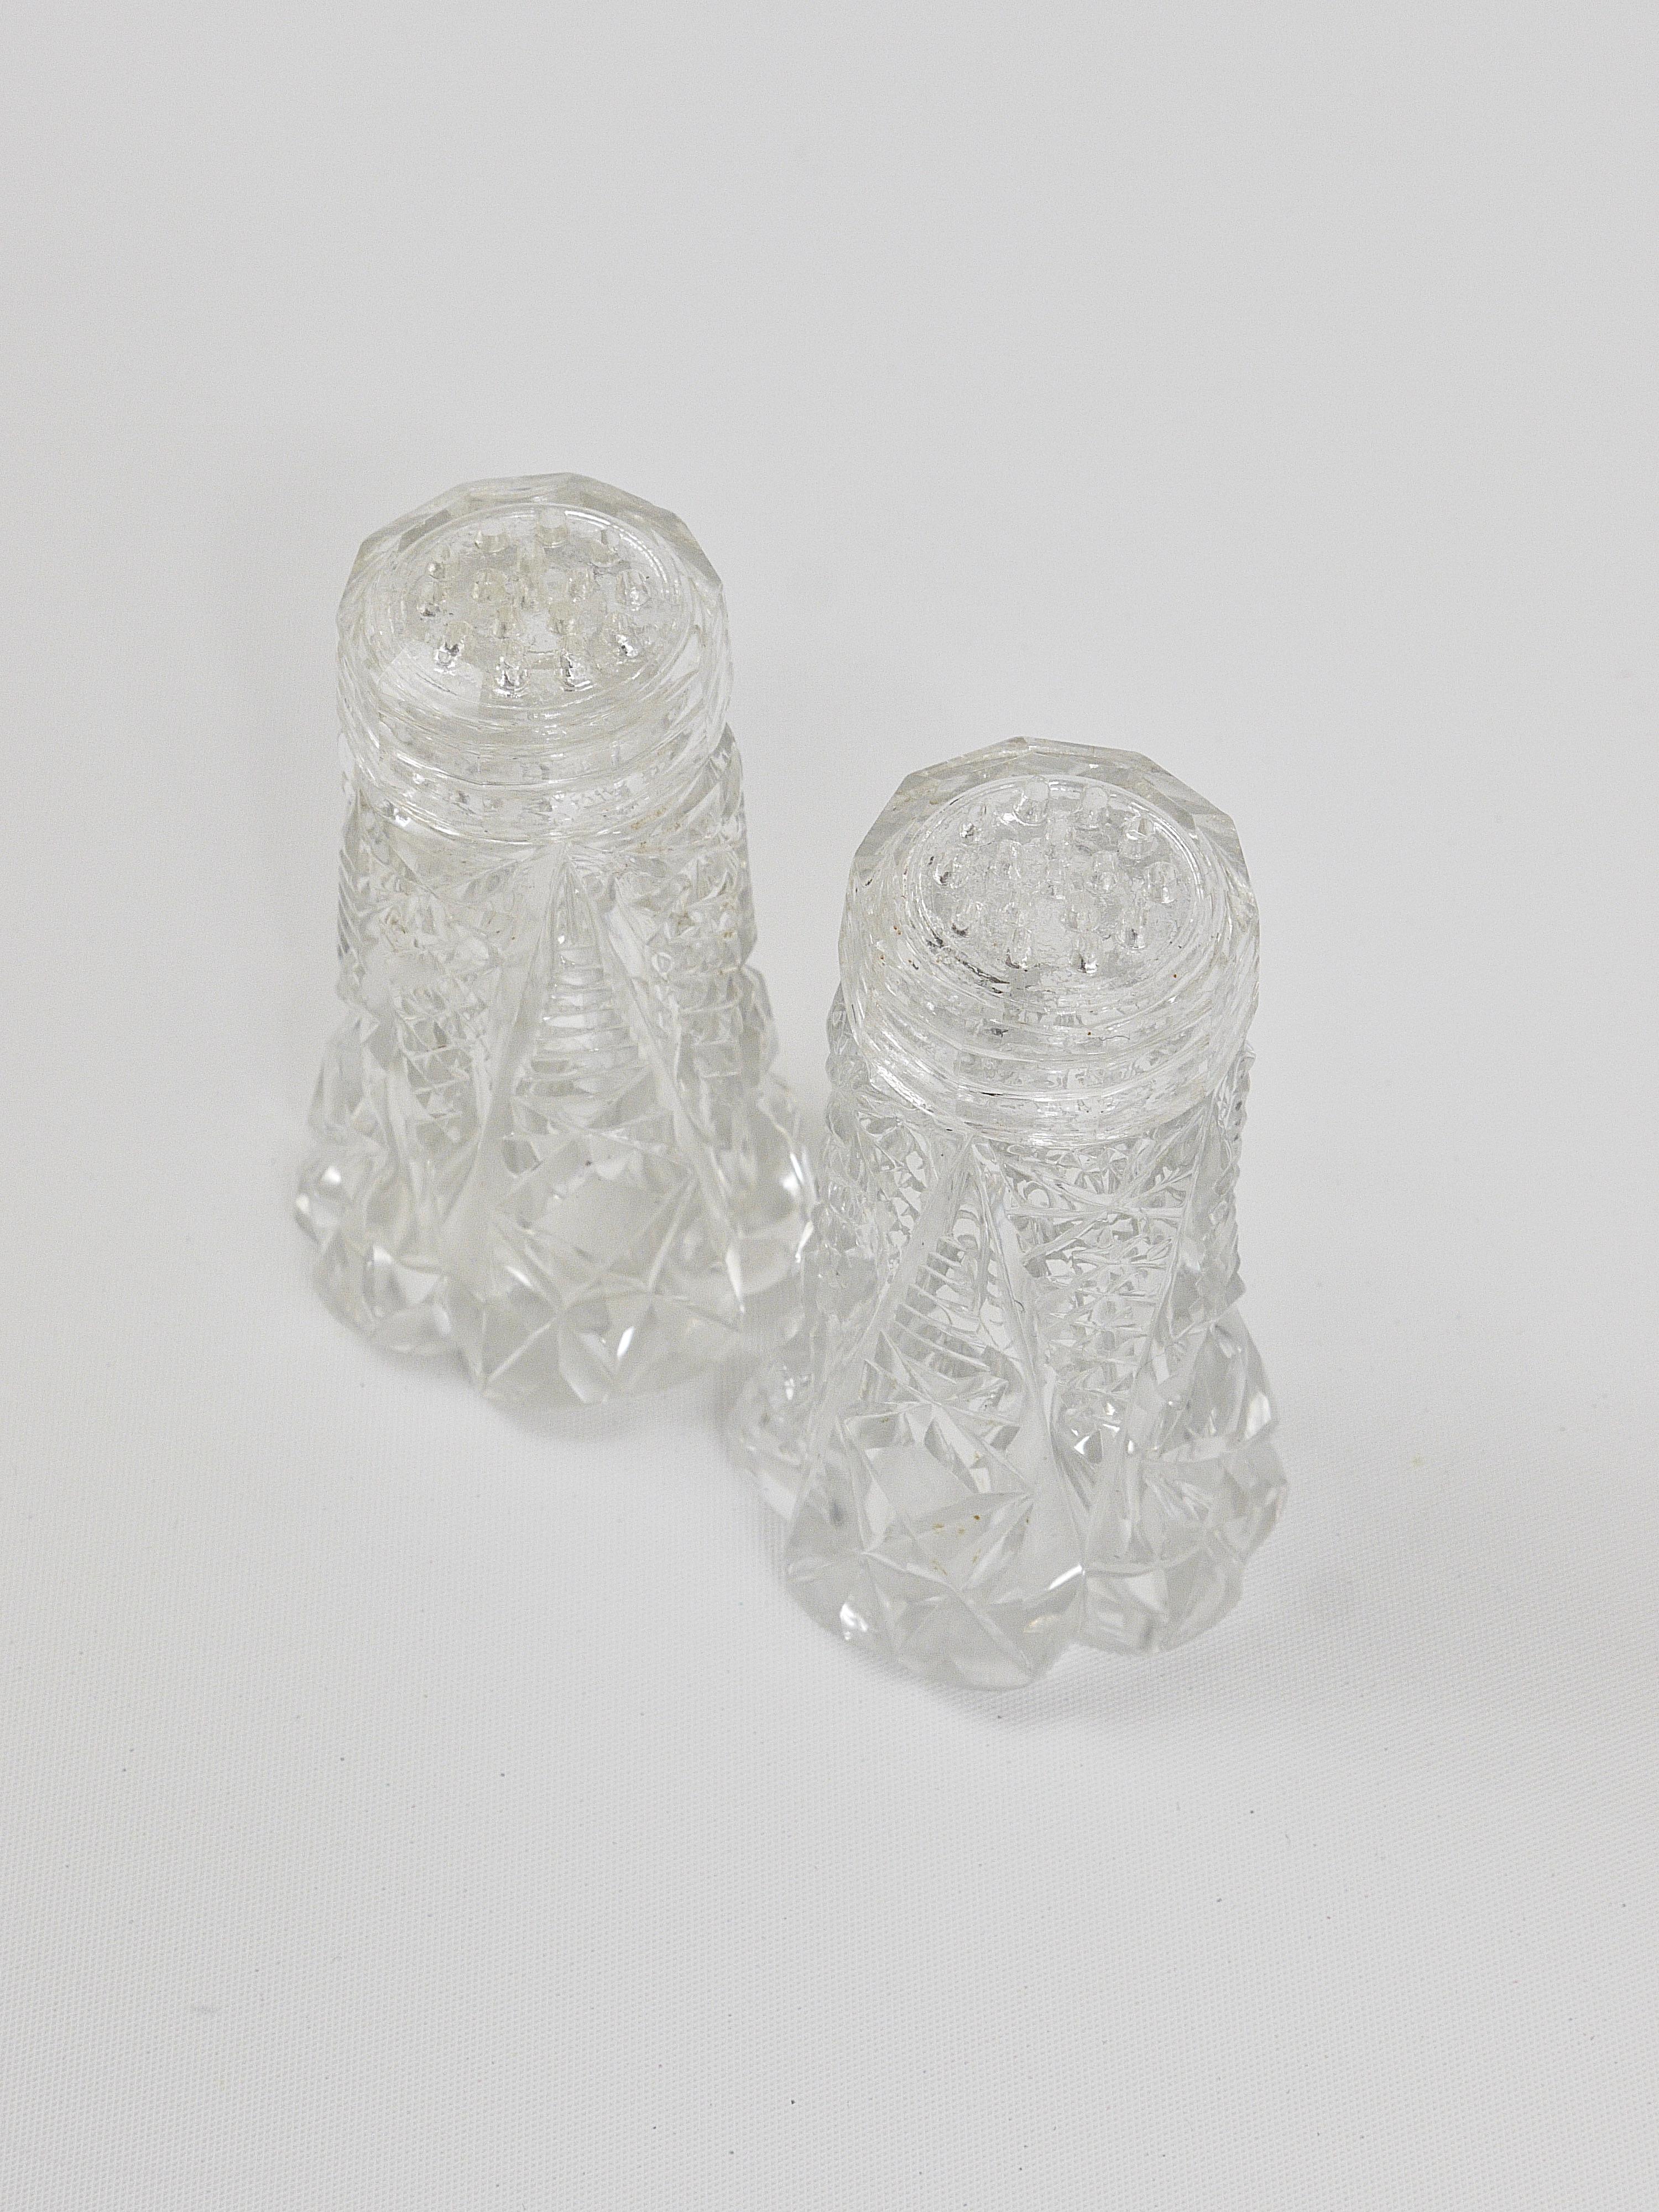 Early 20th Century French Art Nouveau Salt and Pepper Shakers, Facetted Crysta Glass from the 1920s For Sale